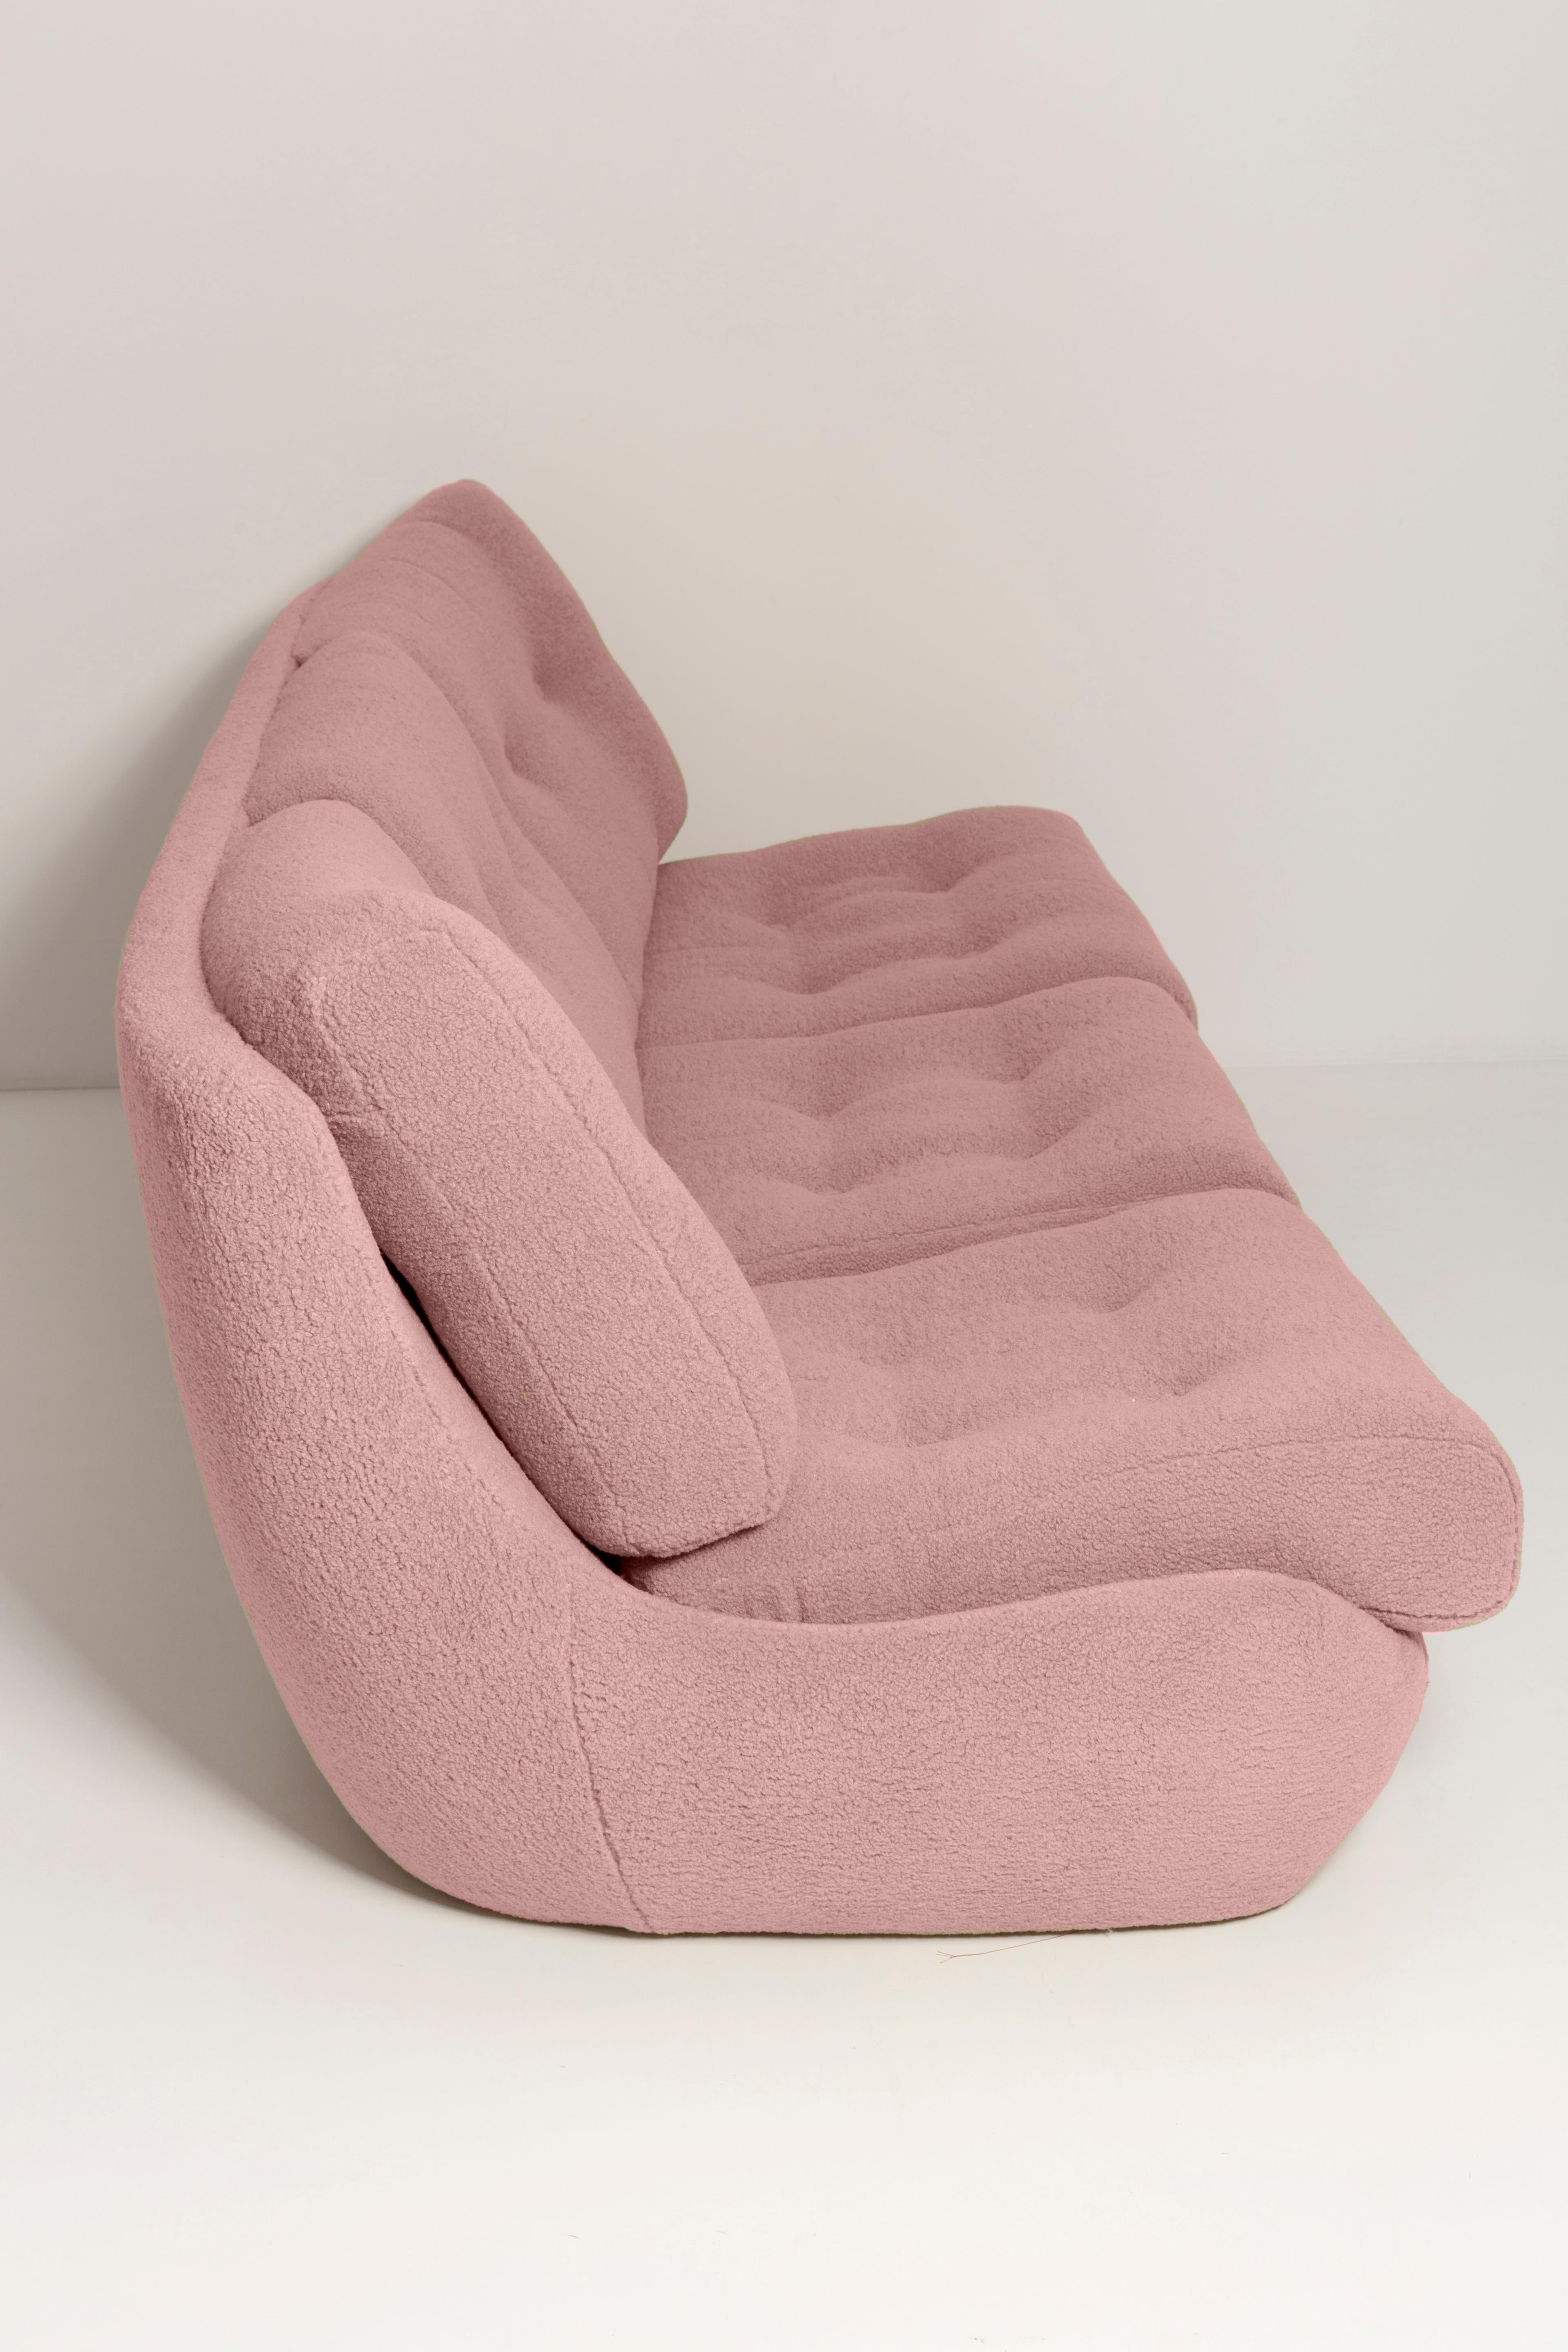 Pink Blush Boucle Atlantis Sofa and Armchairs, Europe, 1960s For Sale 2